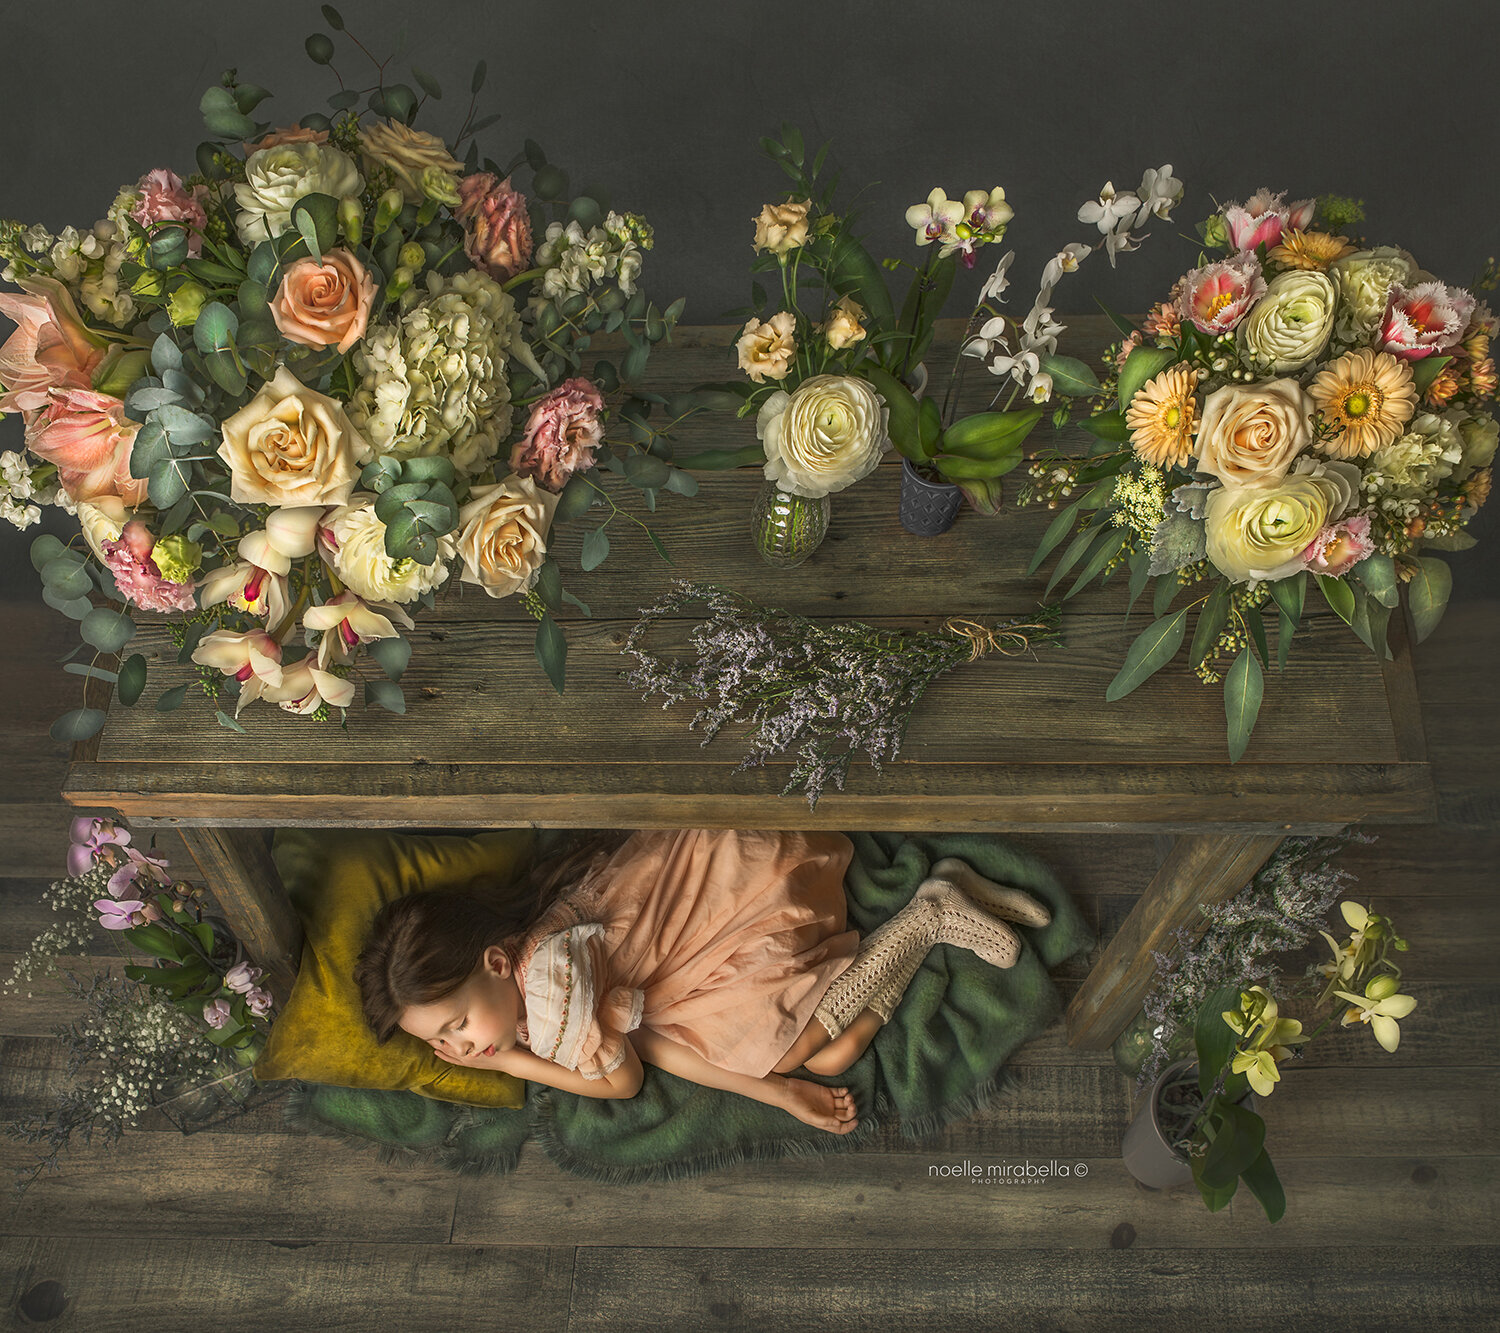 Little girl sleeping under a table full of pink and peach flowers.